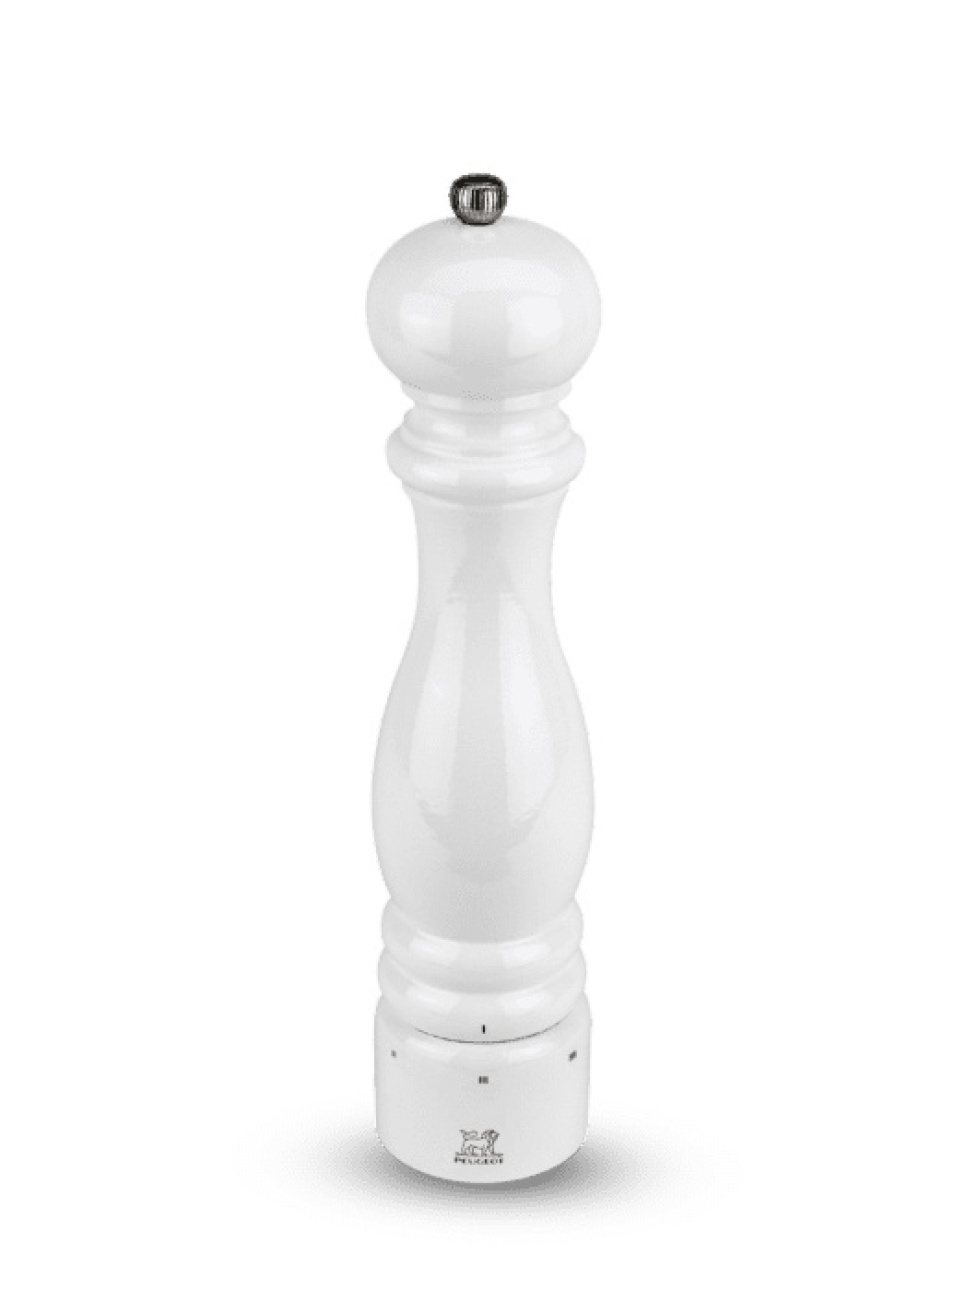 Paris Pepper mill 30 cm, U Select, White - Peugeot in the group Cooking / Kitchen utensils / Salt & pepper mills at KitchenLab (1090-13459)